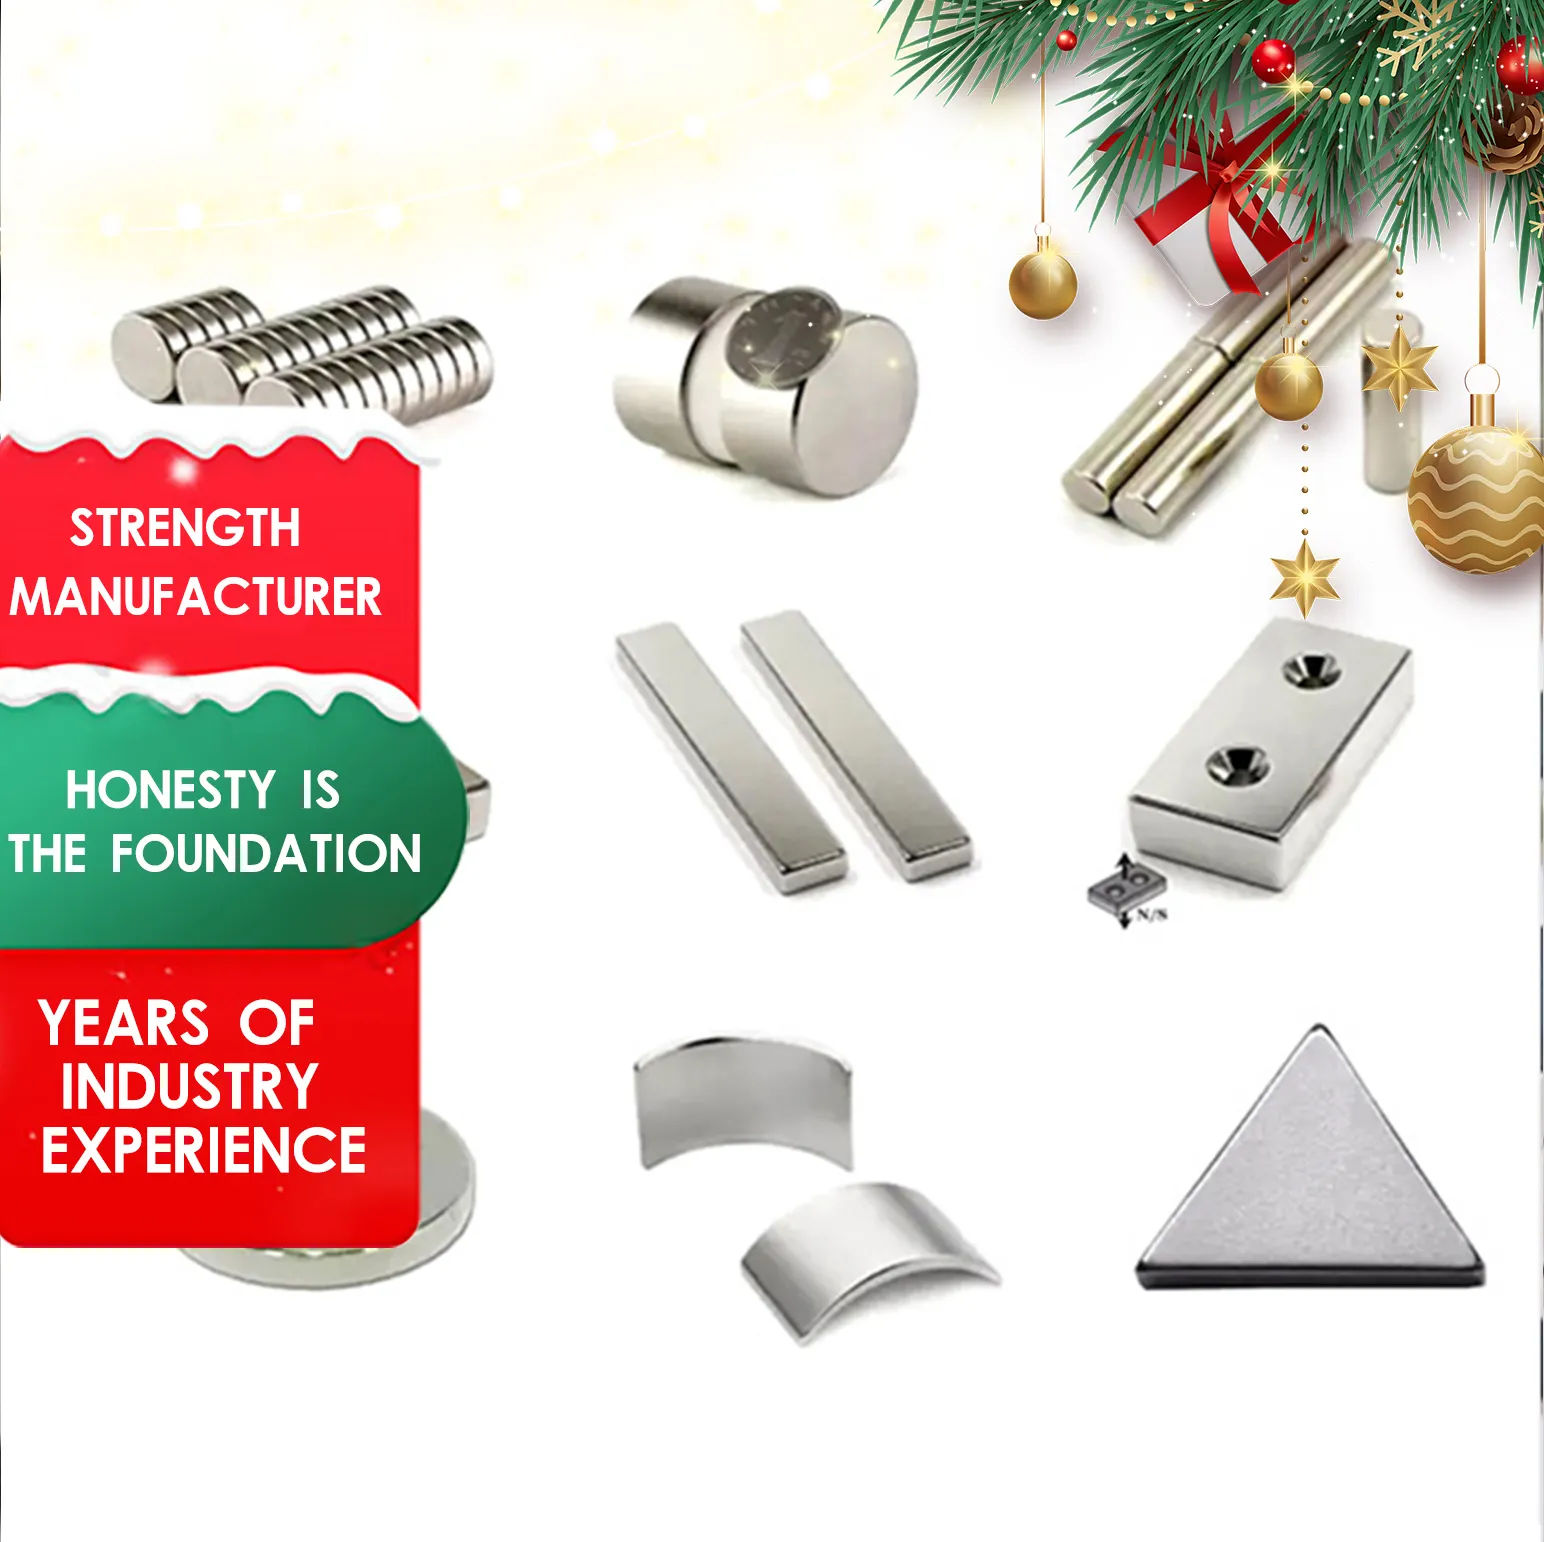 Christmas Limited Time Offer: Big Savings on Powerful Magnets! NdFeB Powerful Permanent Speakers